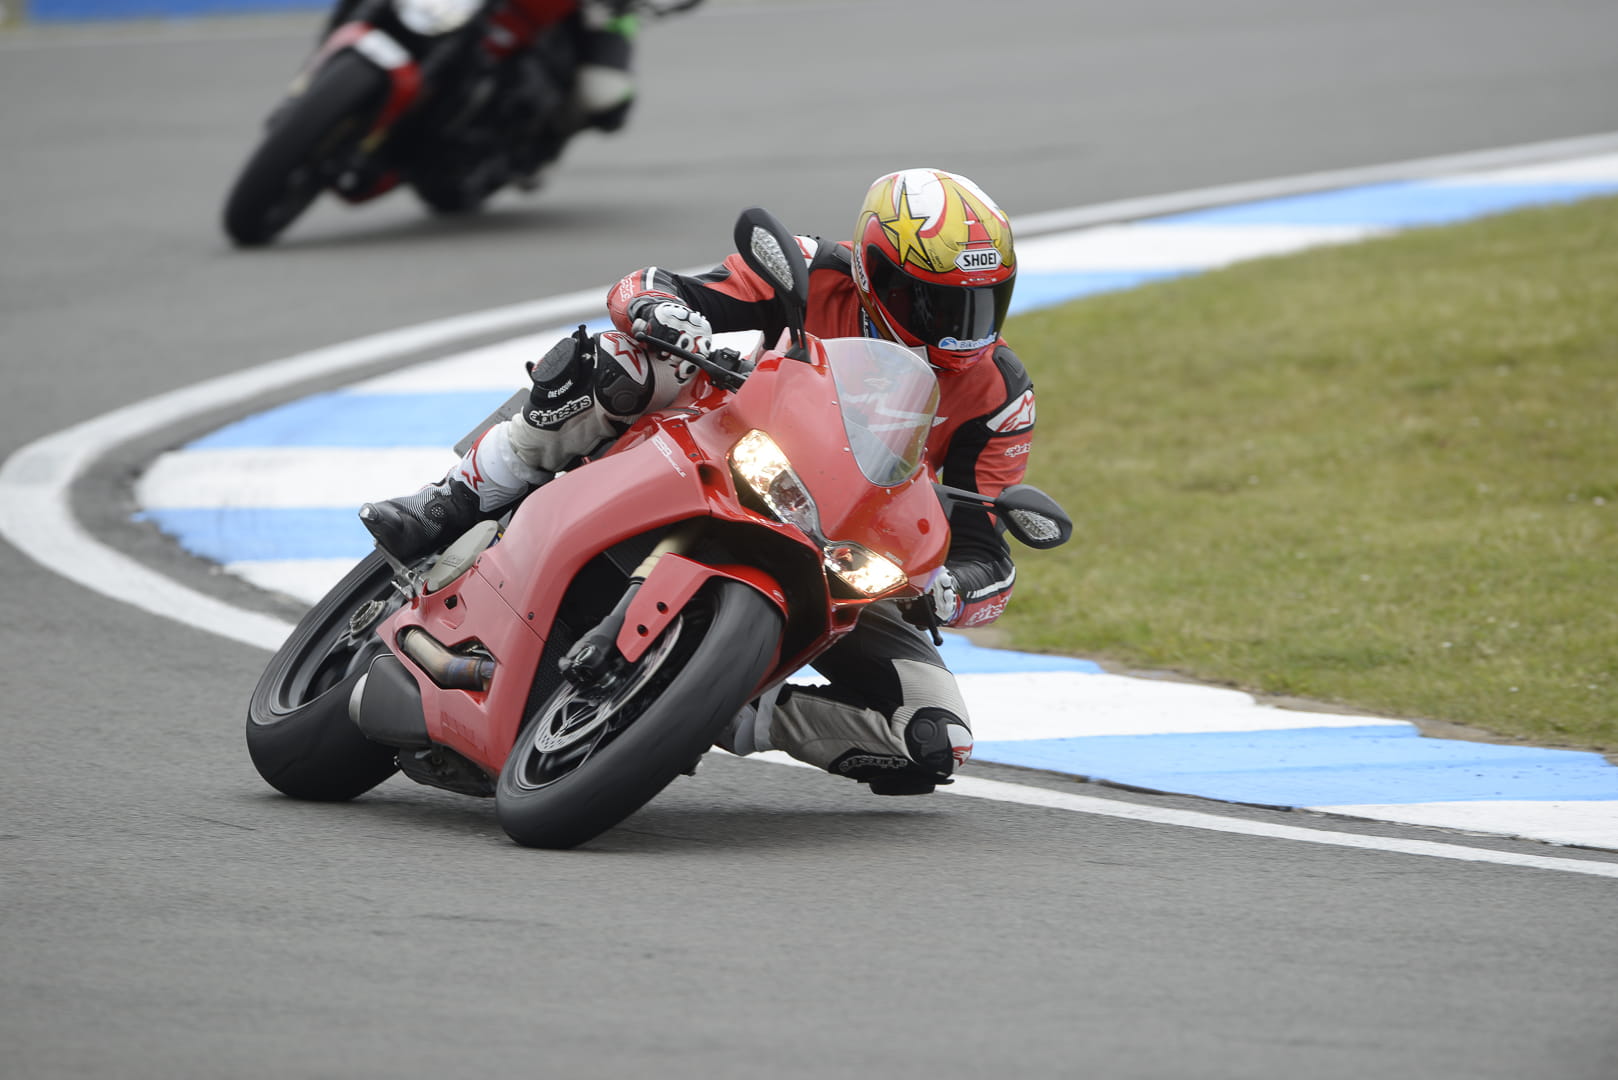 The Ducati gets some grip at Goddards with Potski on-board